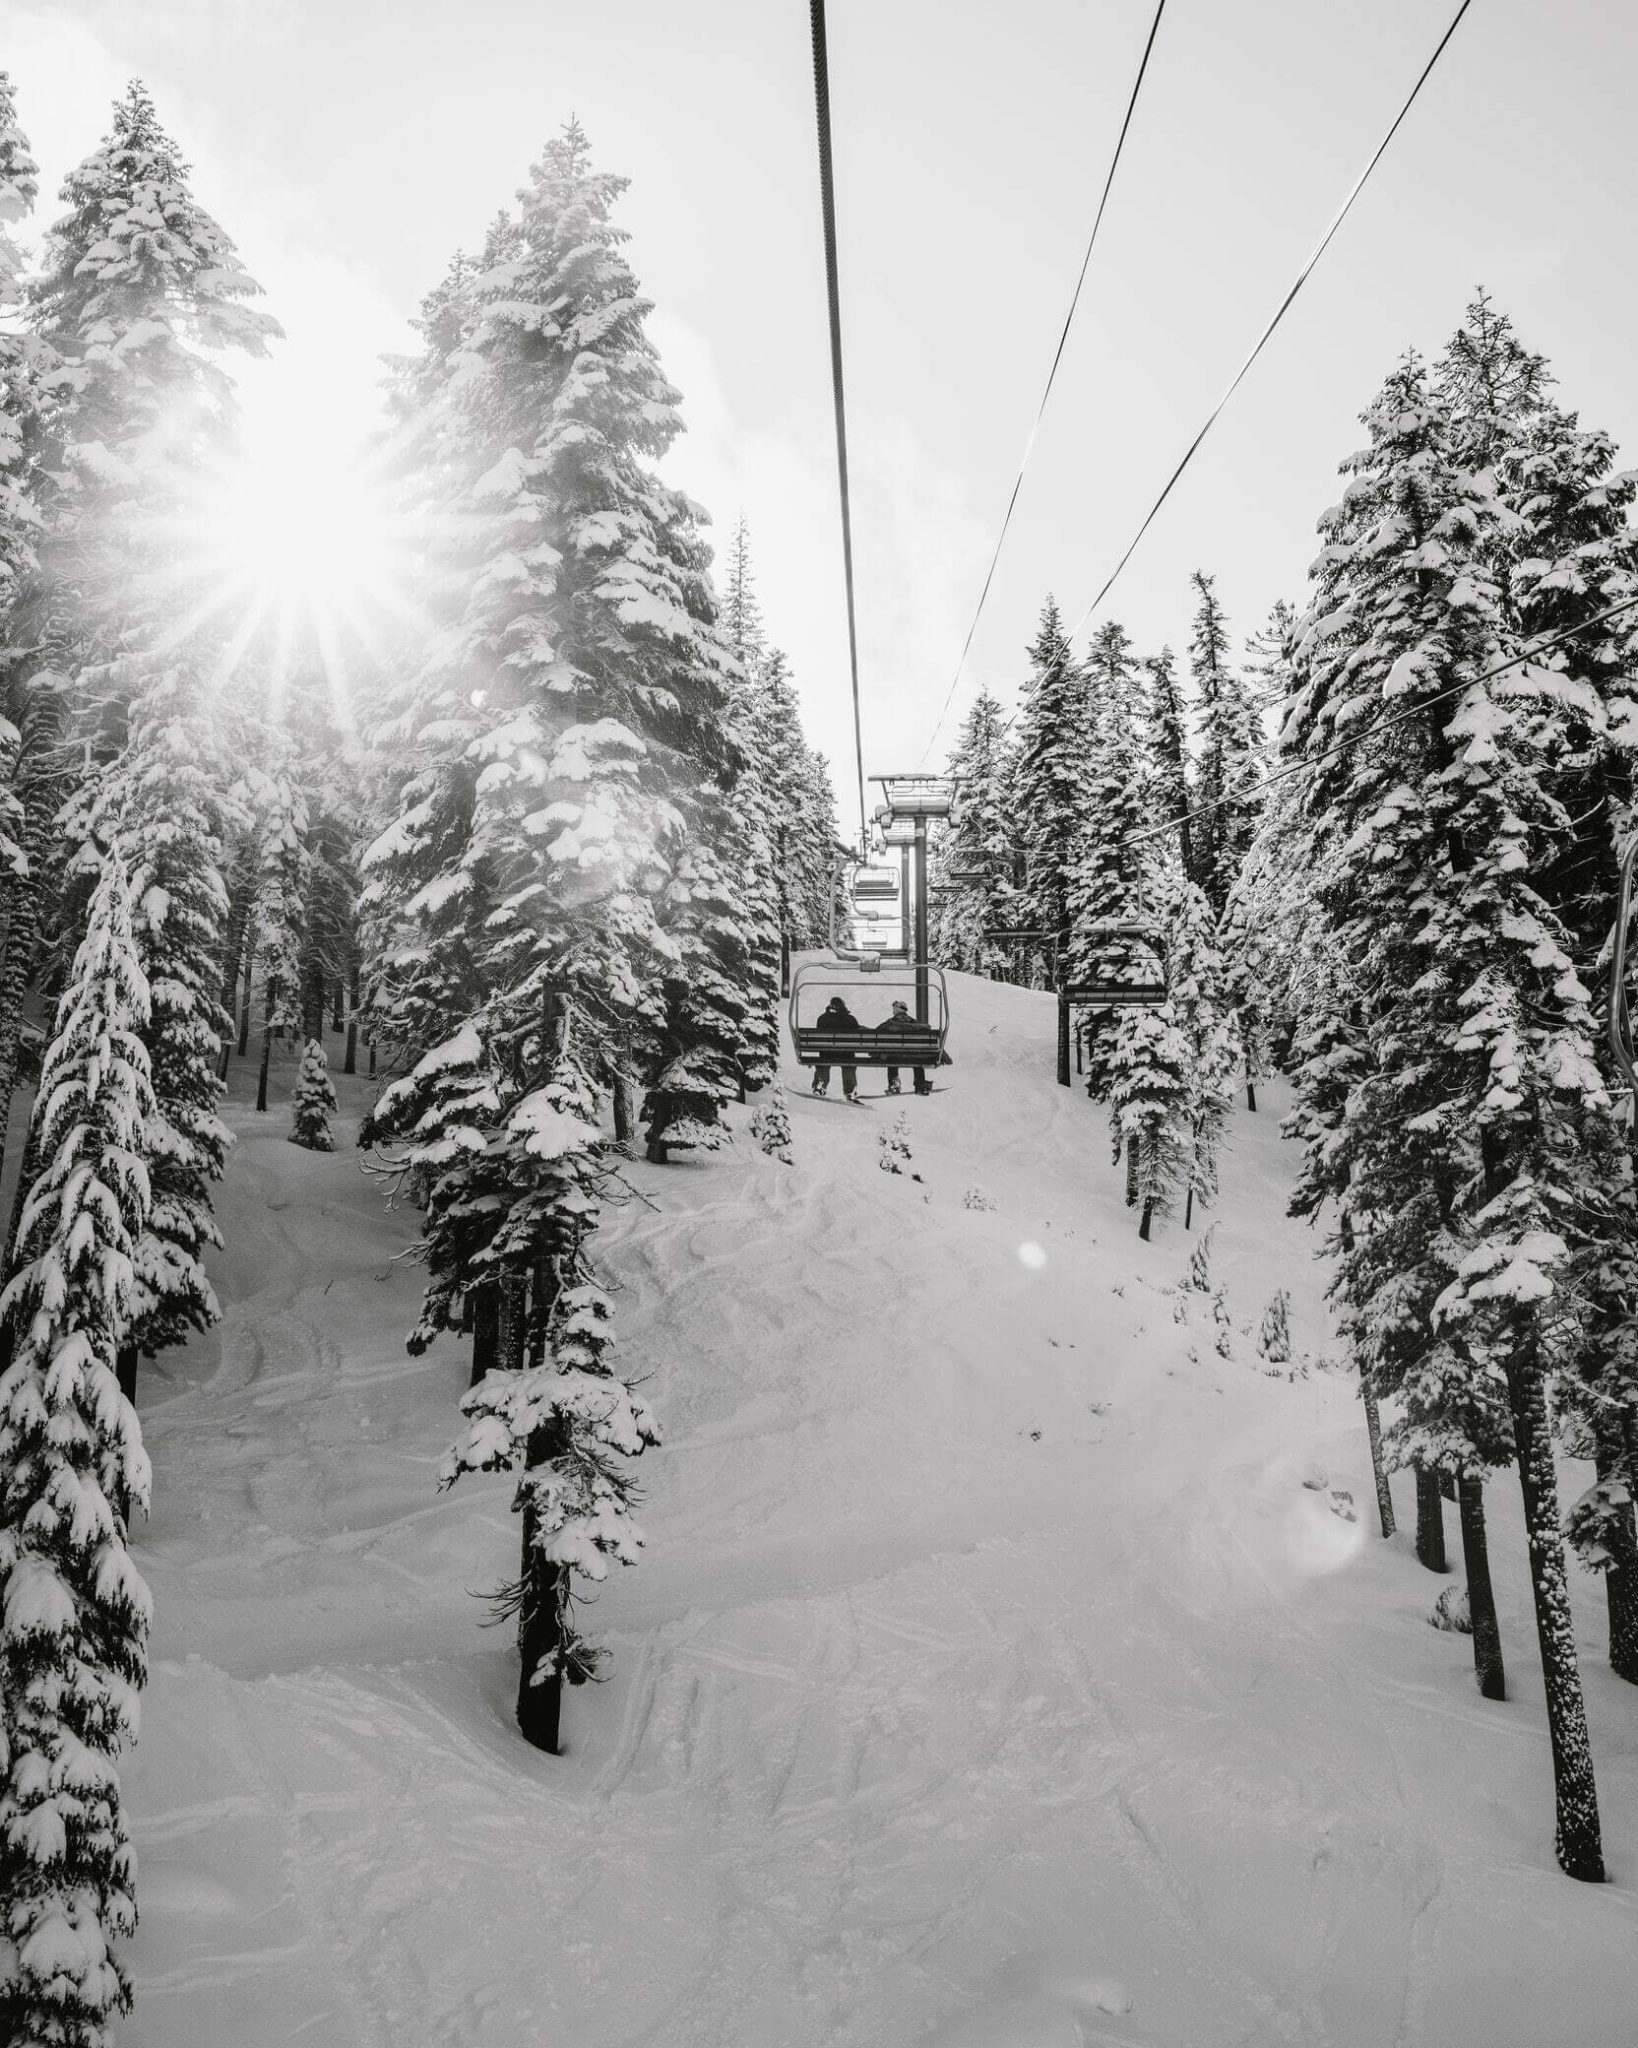 A couple ride the ski lift together during their romantic getaway to Jackson Hole, WY.